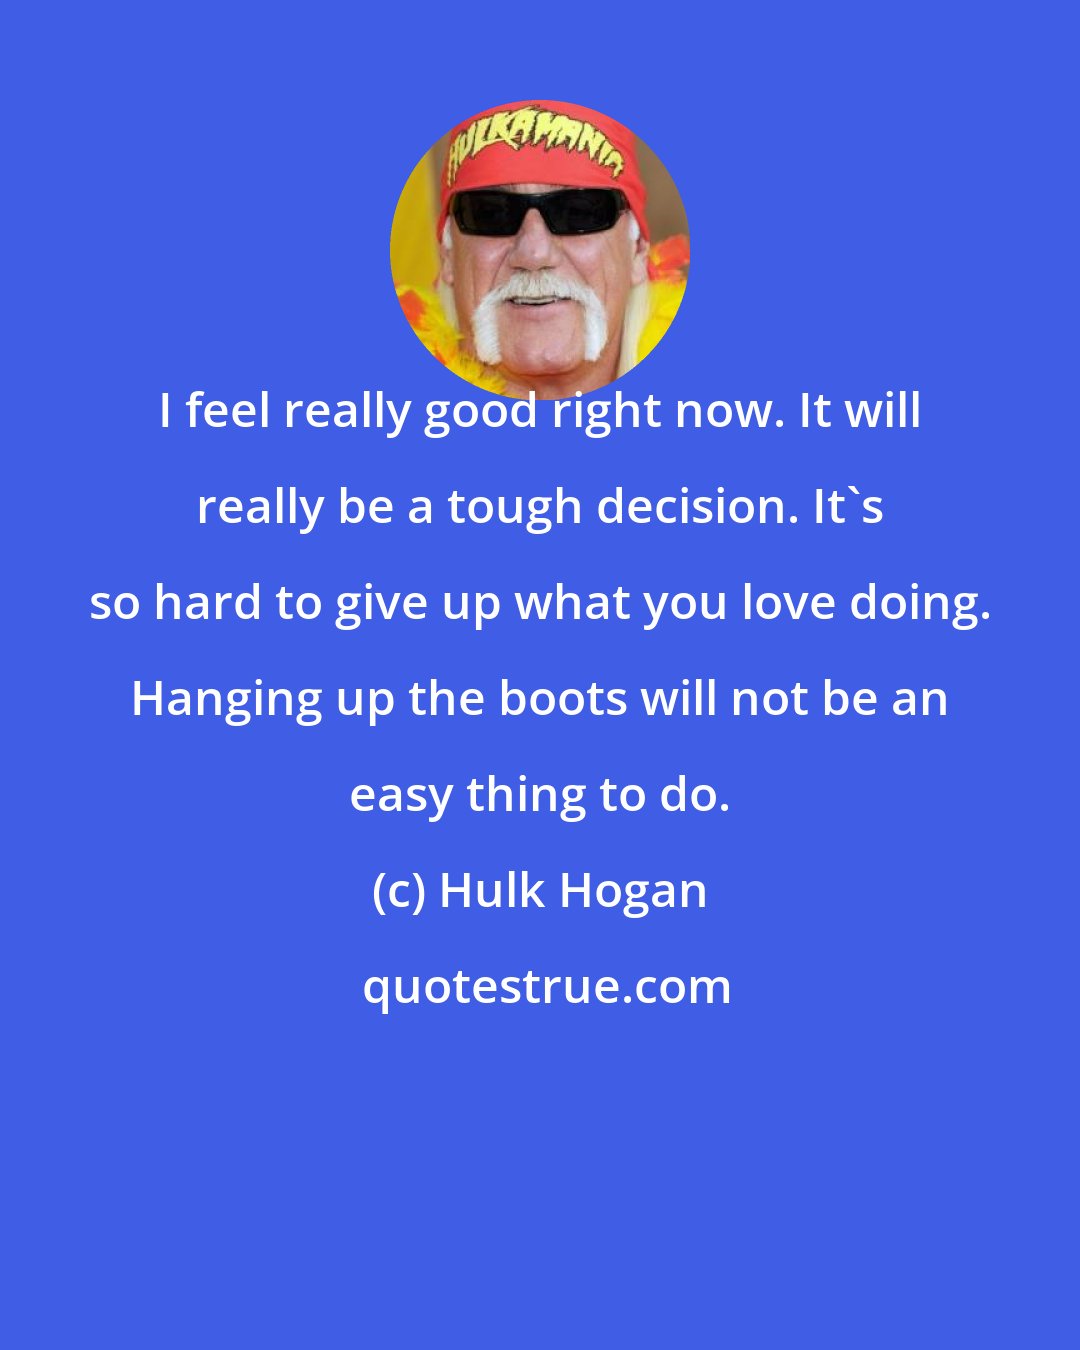 Hulk Hogan: I feel really good right now. It will really be a tough decision. It's so hard to give up what you love doing. Hanging up the boots will not be an easy thing to do.